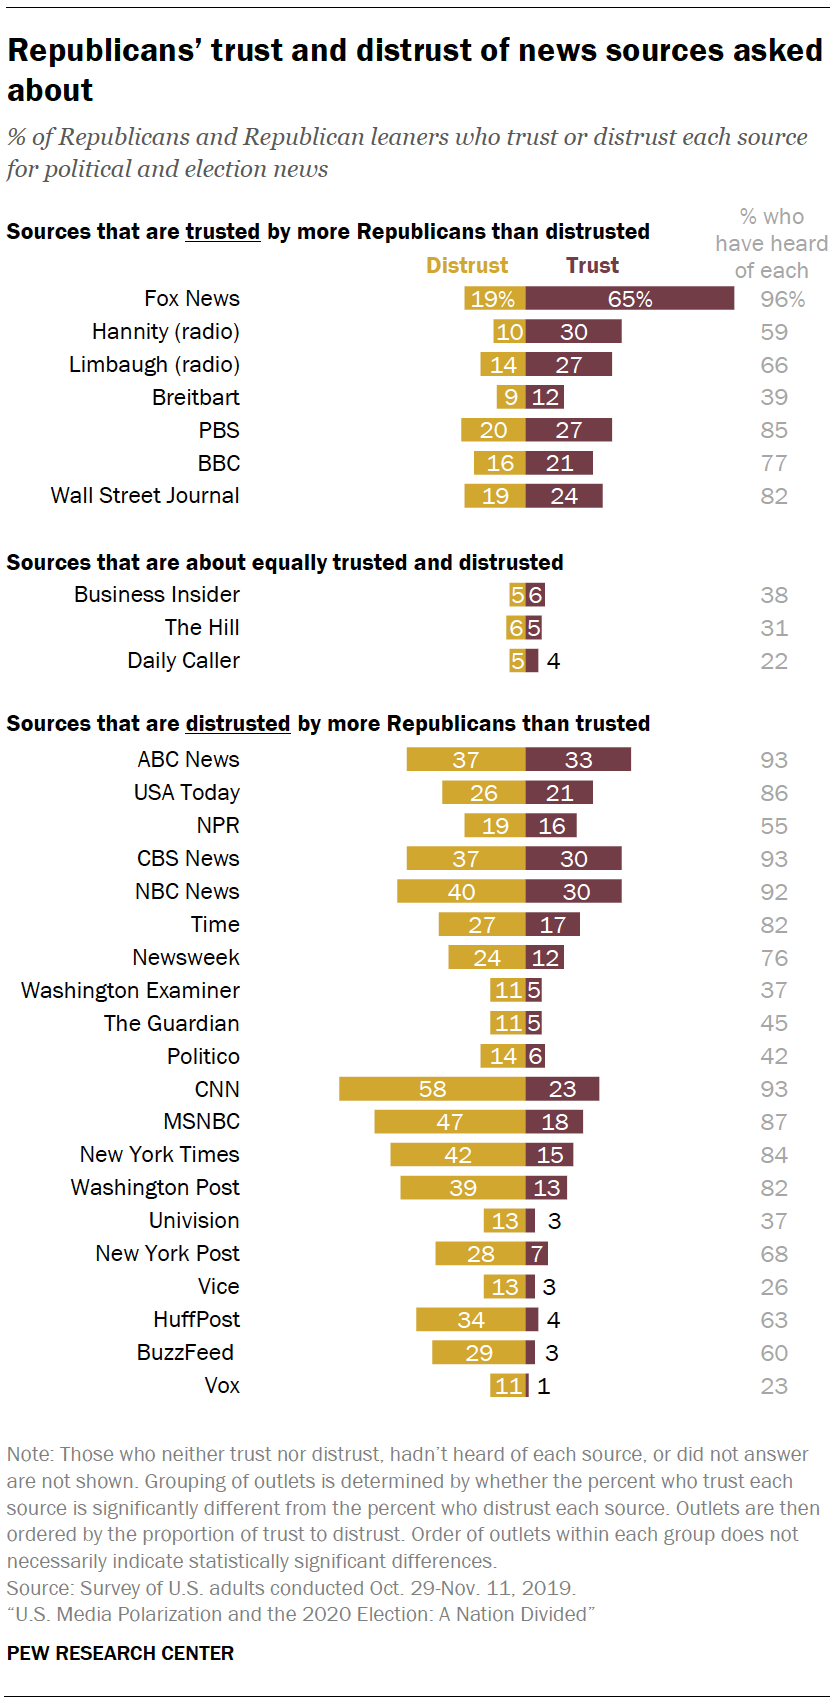 Republicans trust and distrust of news sources asked about 